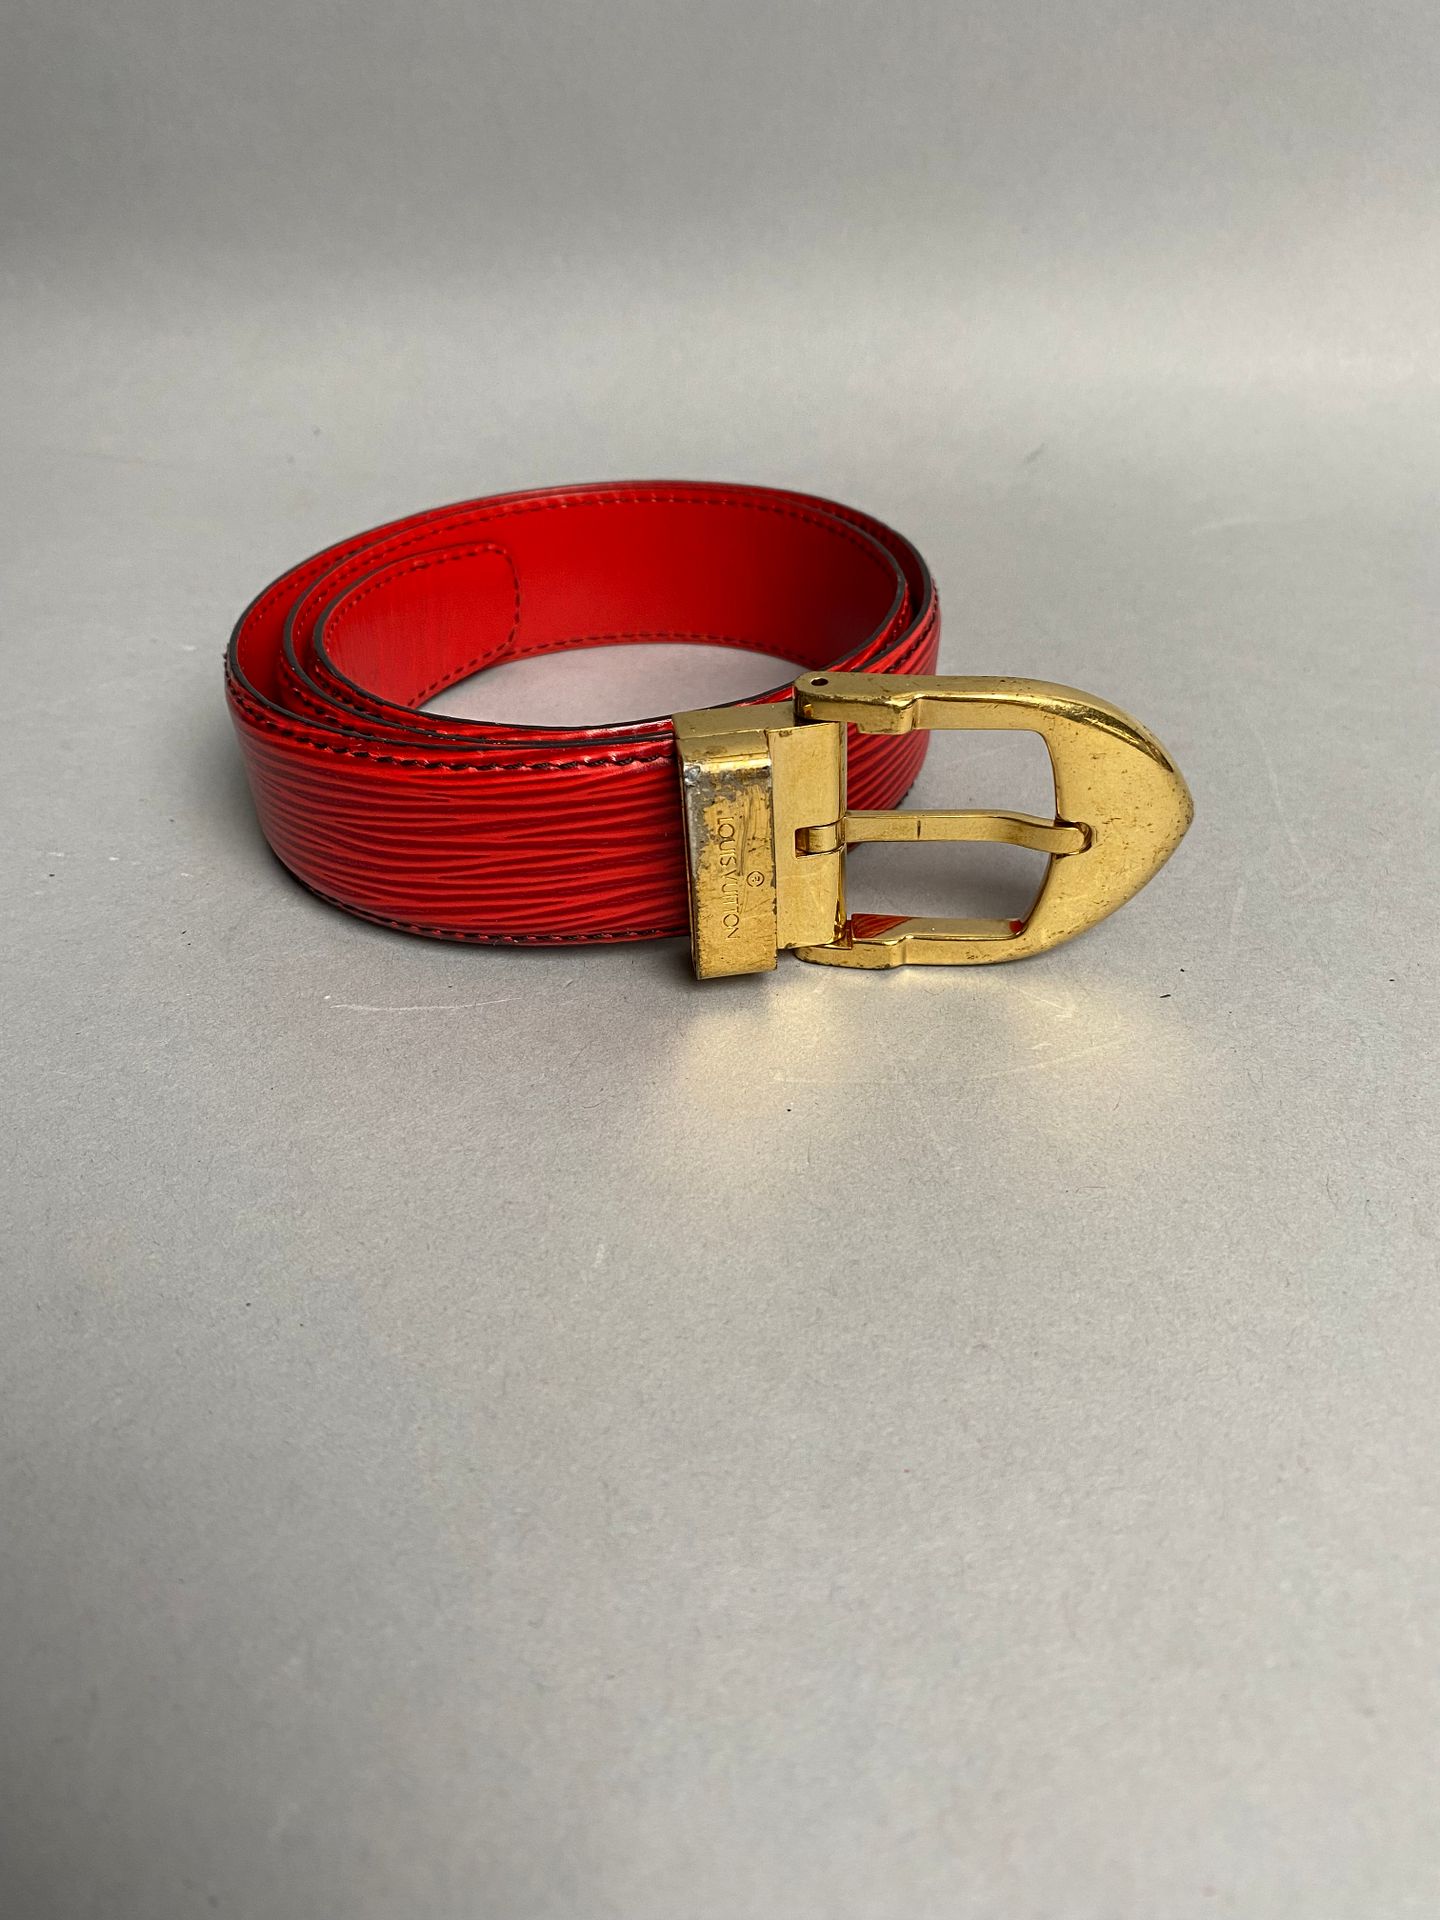 LOUIS VUITTON. Red leather belt, gold metal buckle. Size…